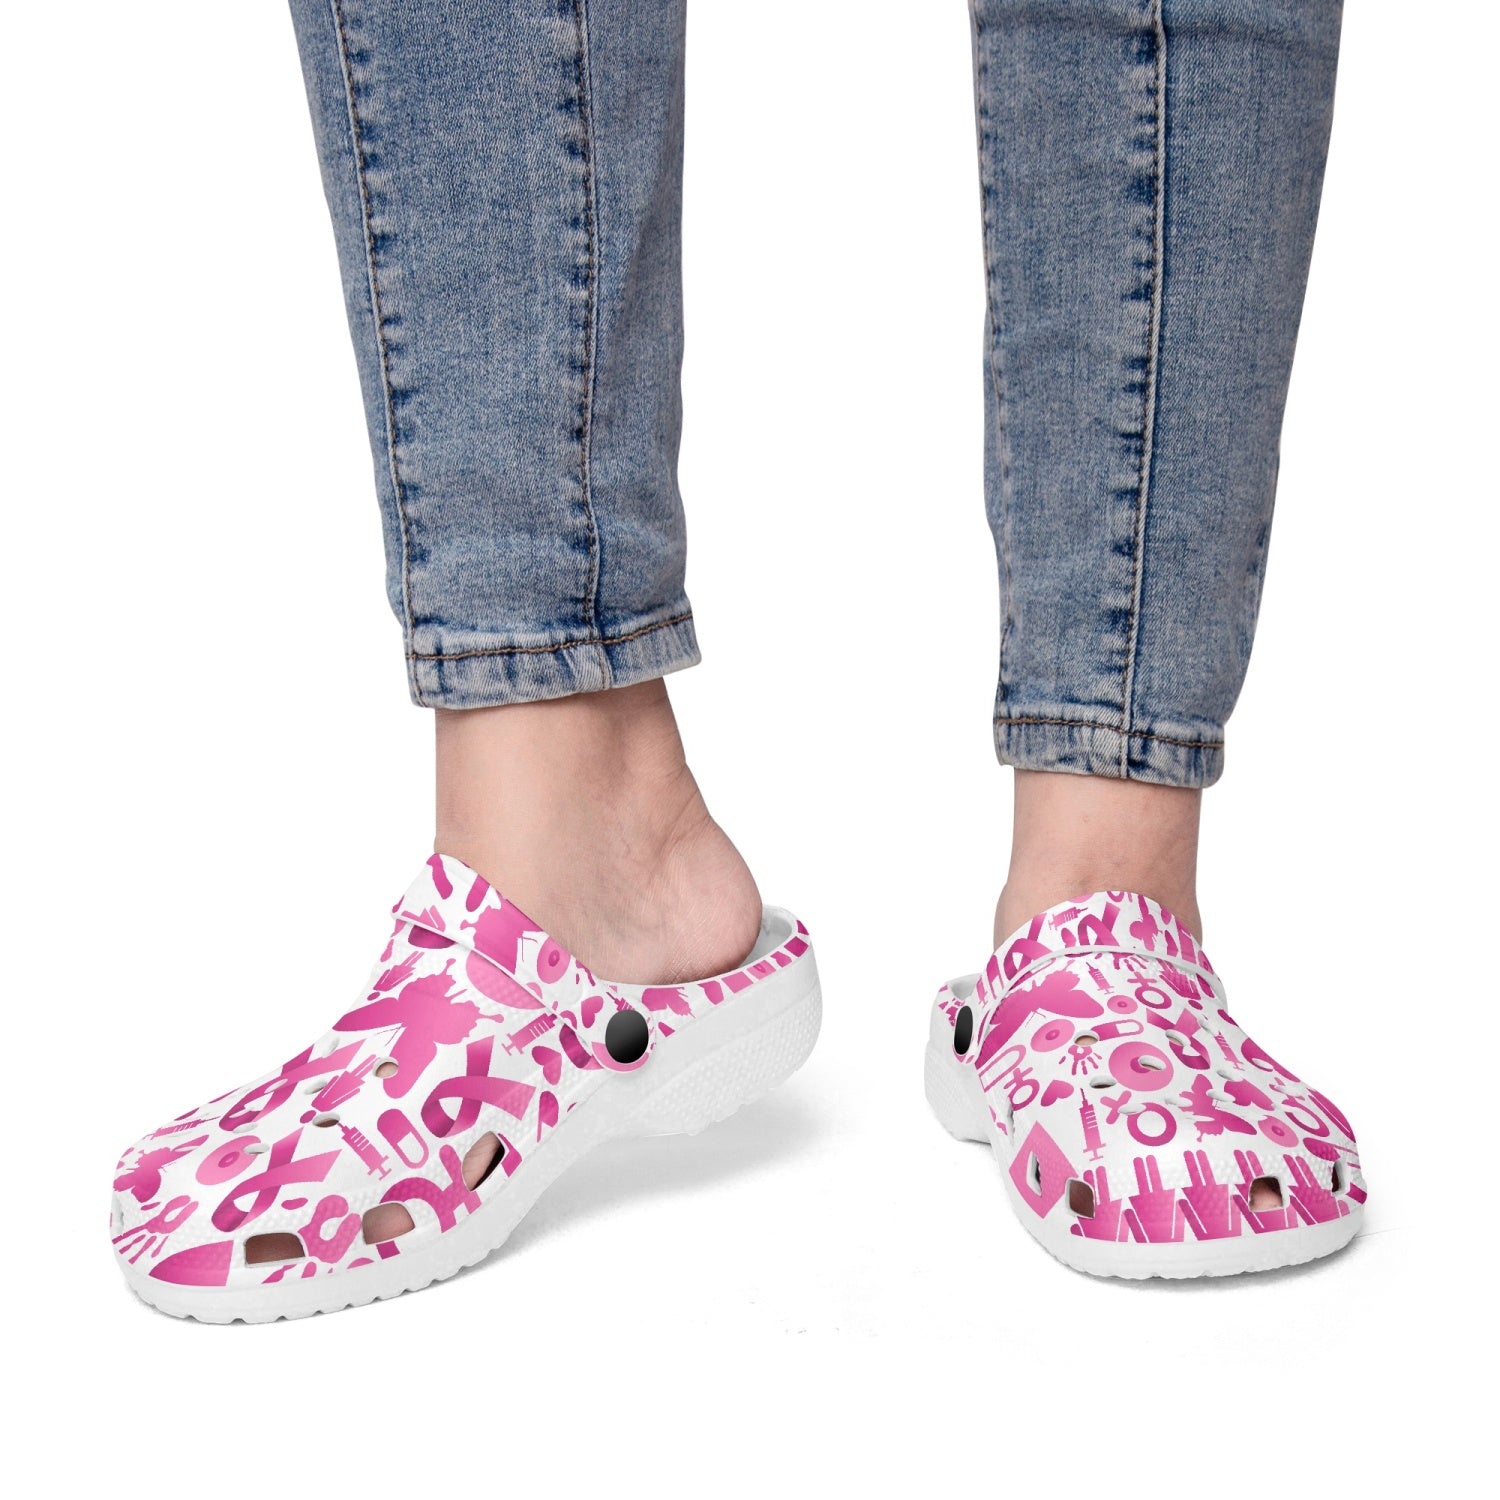 Breast cancer Research clogs